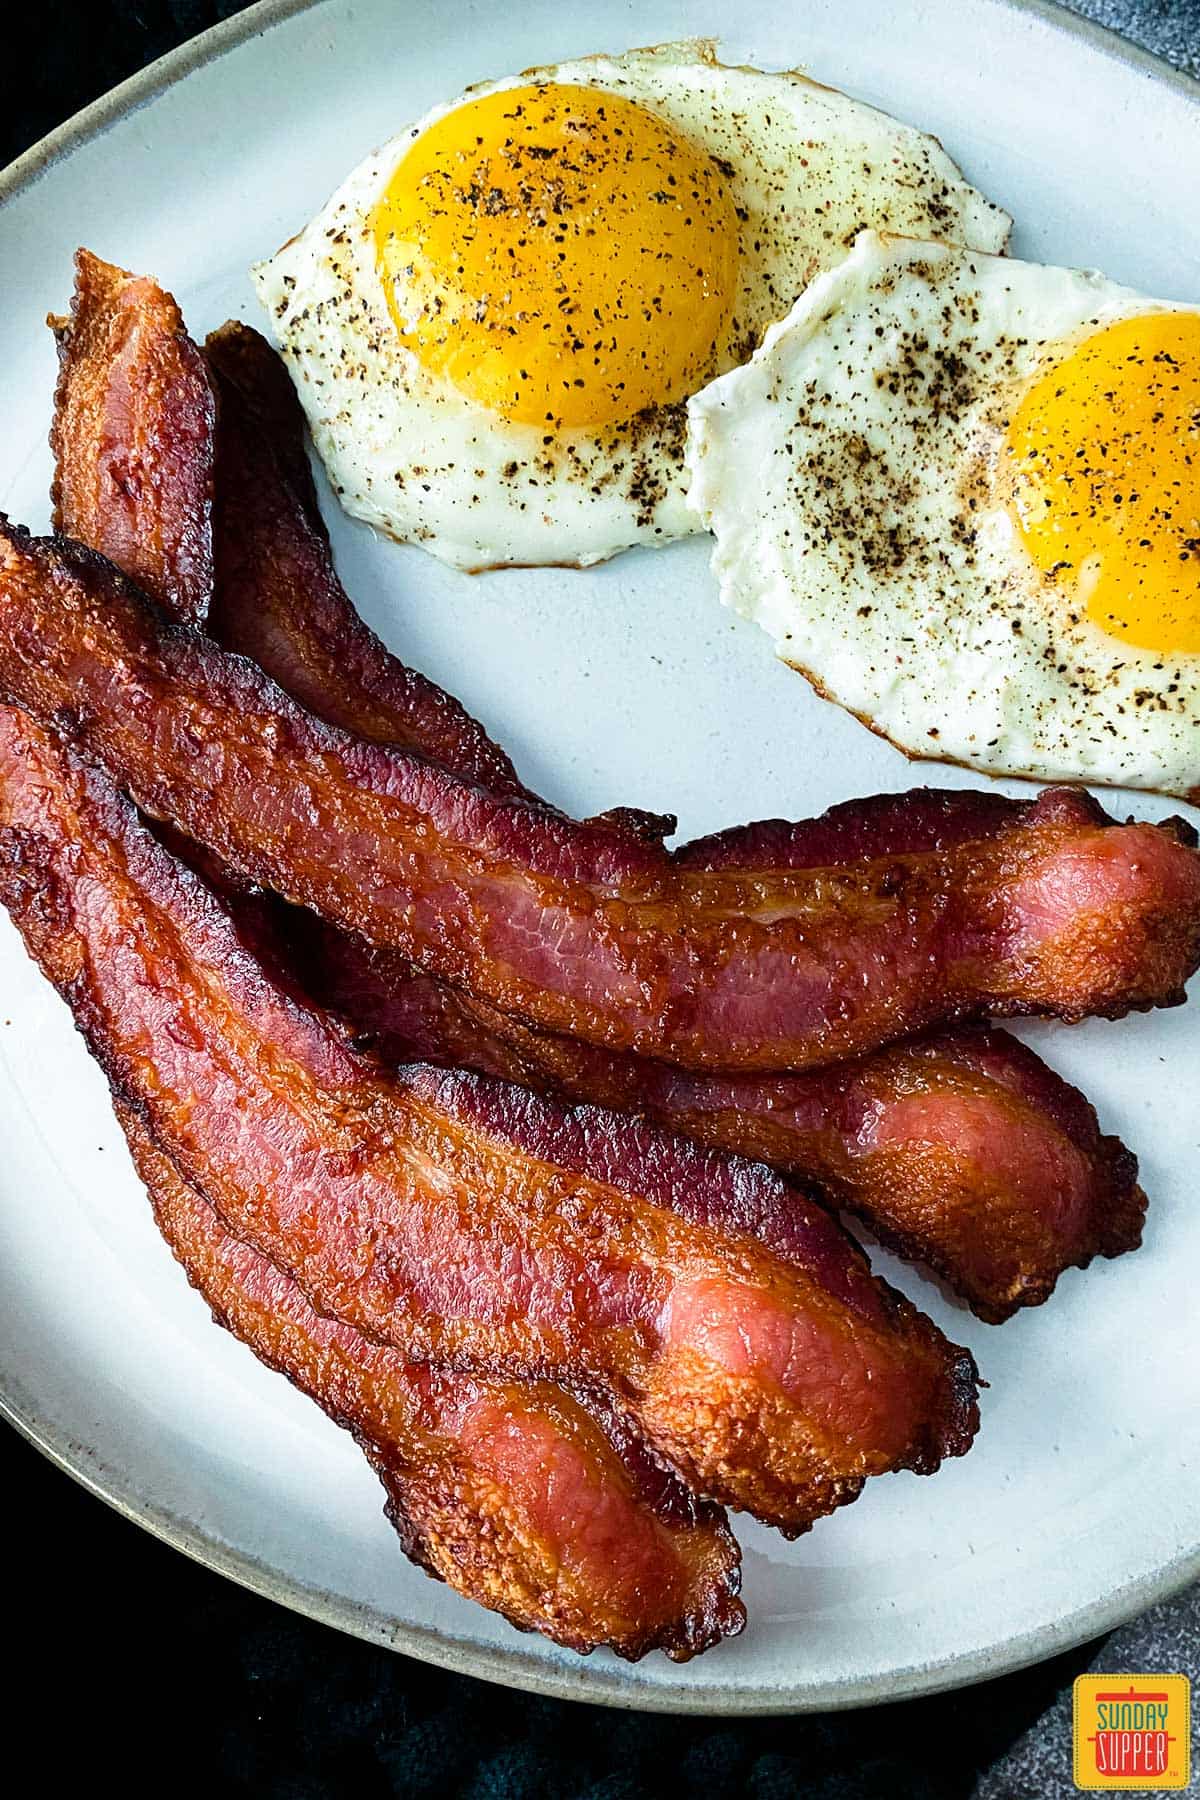 I Cooked Bacon in OVEN vs. AIR FRYER Bacon, it changed me FOREVER!